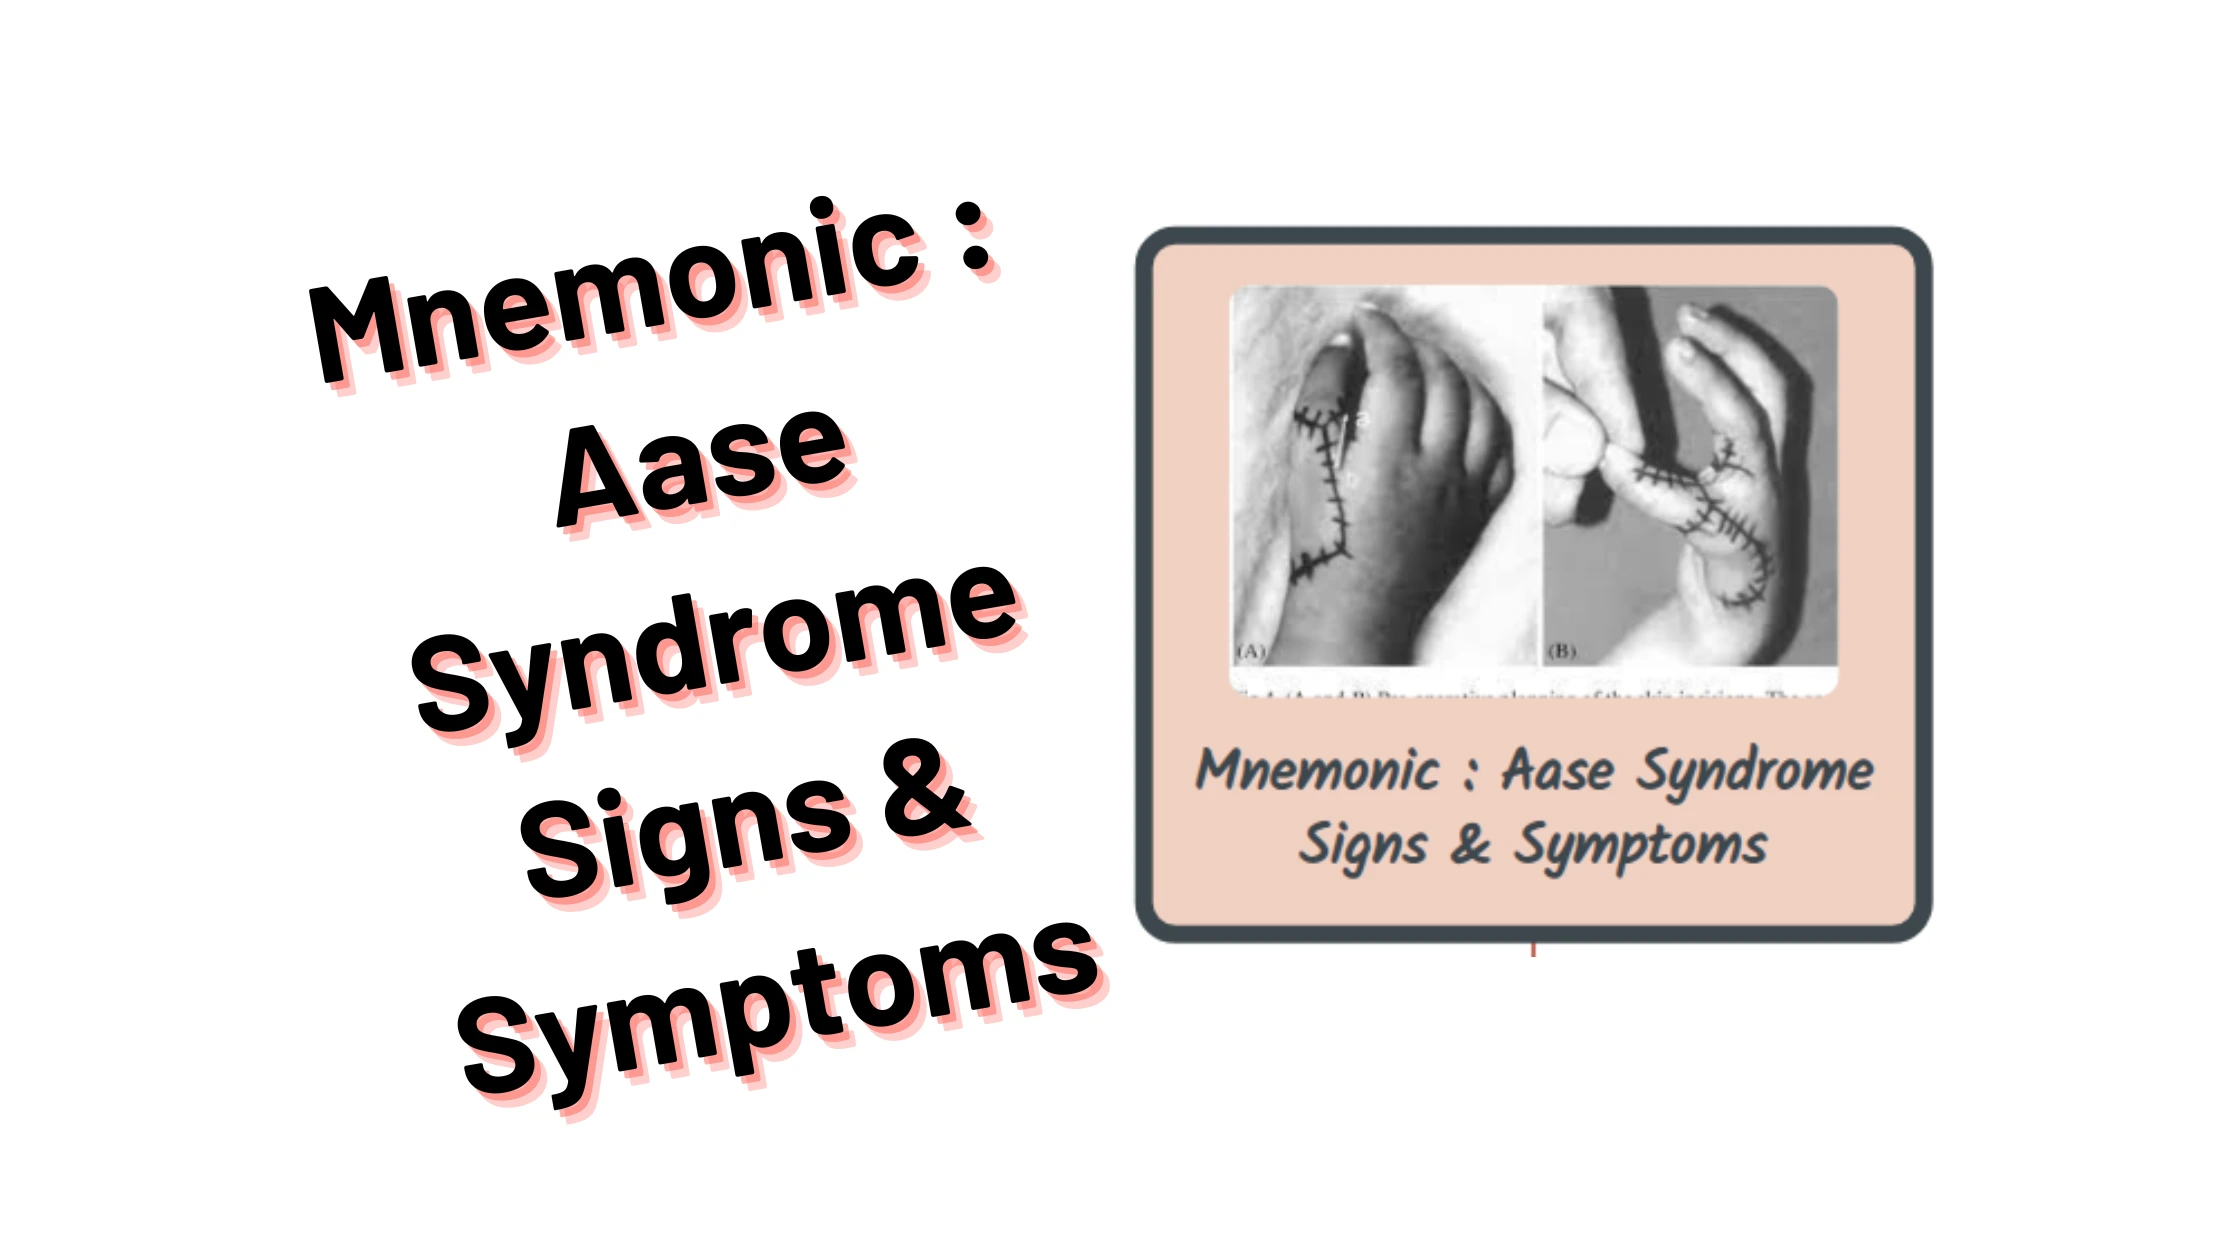 You are currently viewing [Very Cool] Mnemonic : Aase Syndrome Signs & Symptoms